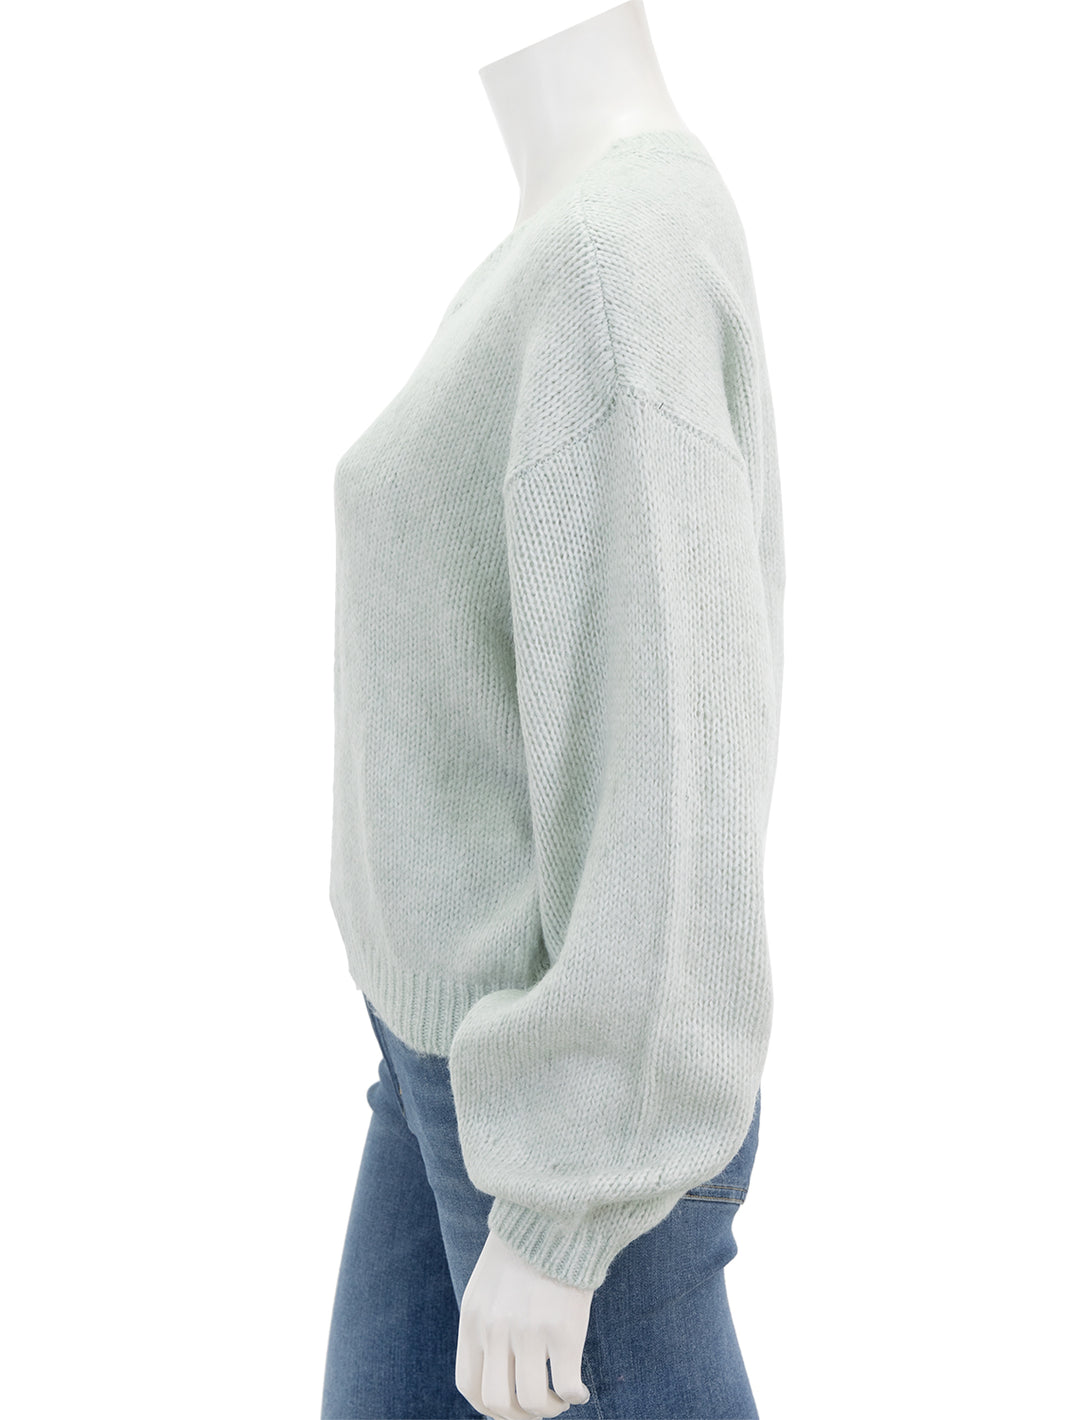 Side view of Steve Madden's colette sweater in jade cream.